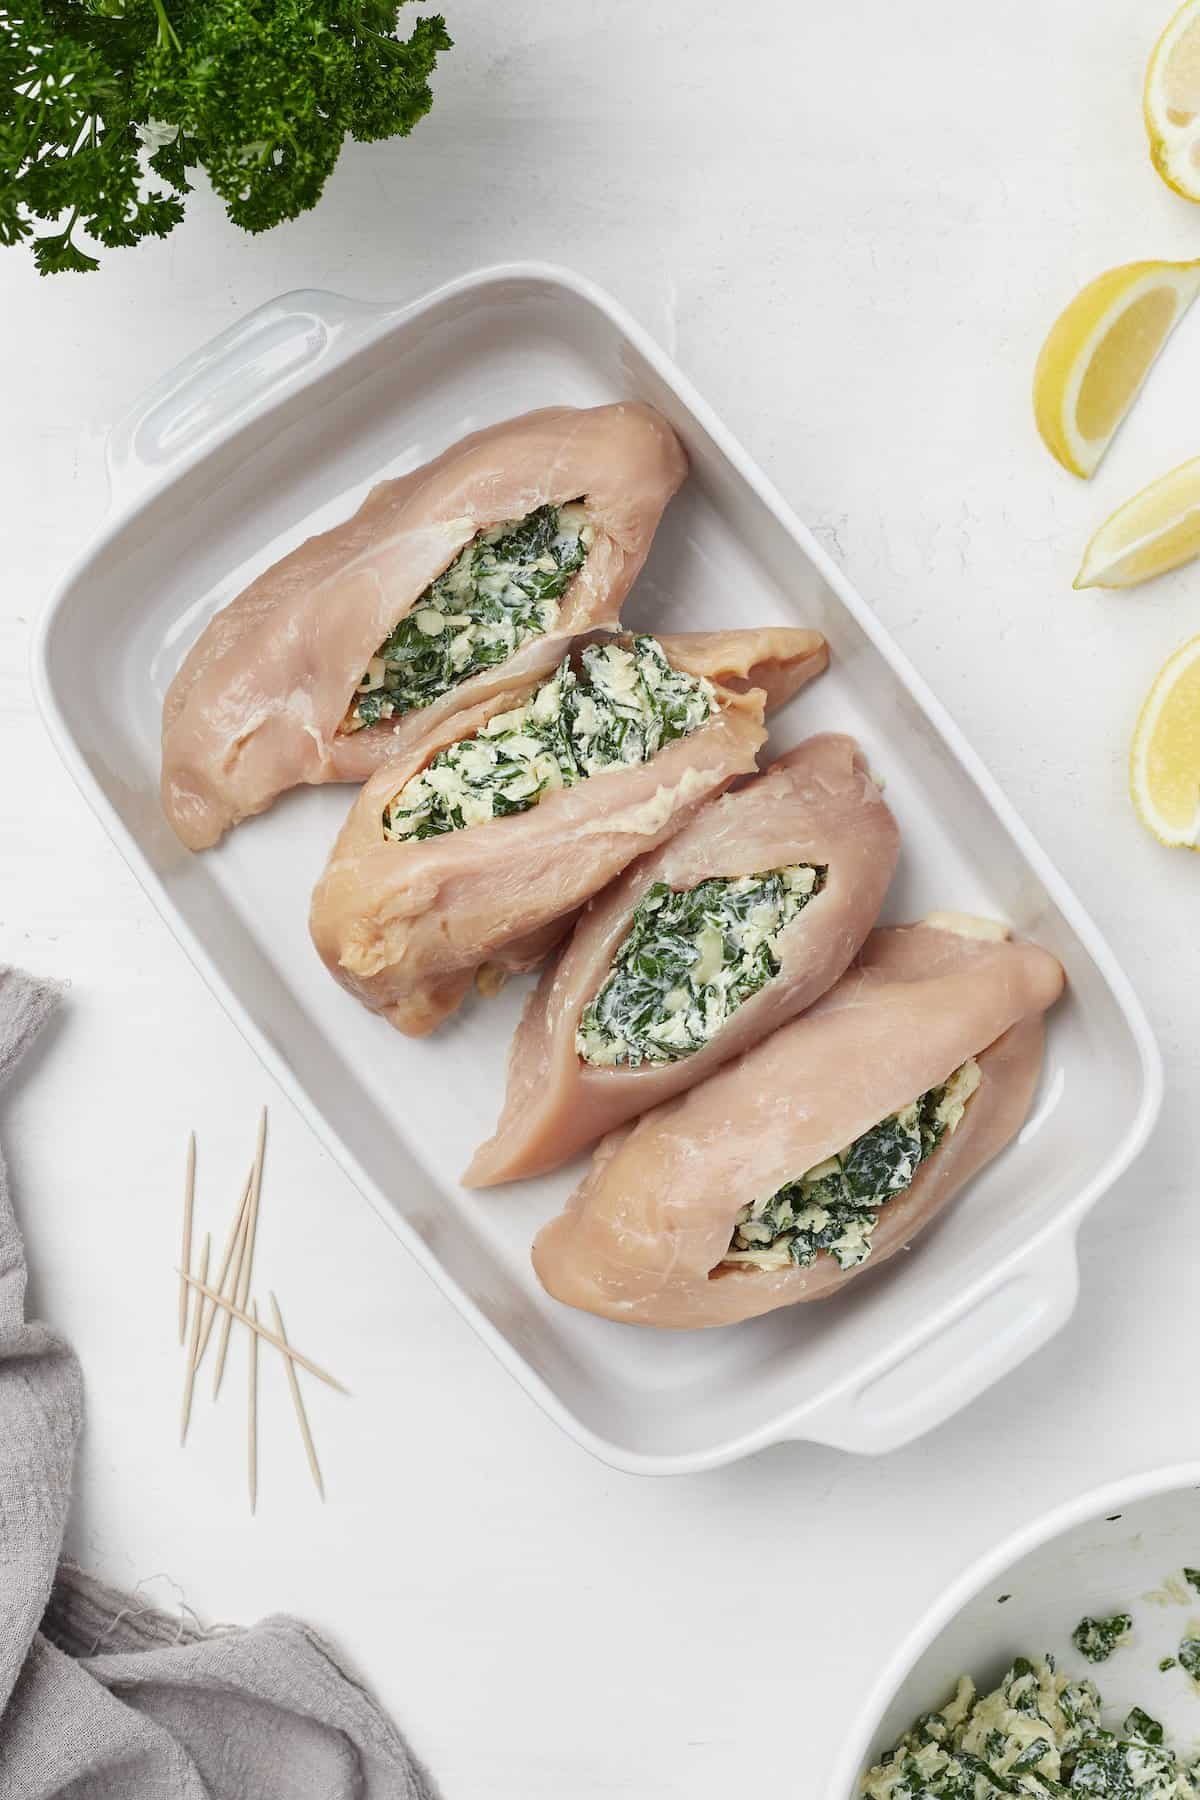 Four stuffed chicken breasts inside of a baking dish with fresh lemon wedges beside it